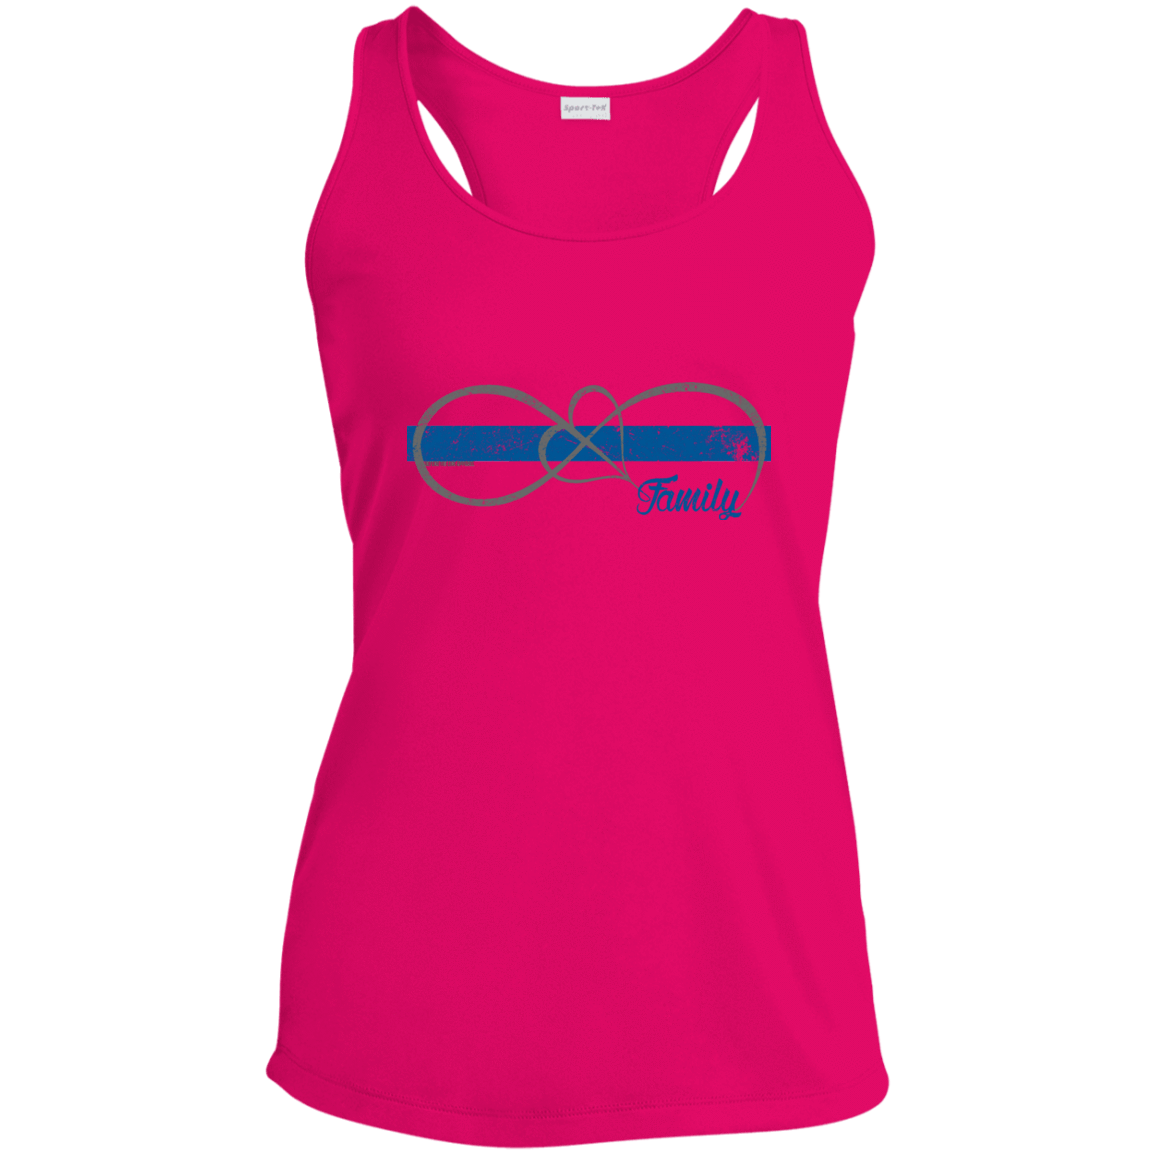 Women's T-Shirts and Athletic Shirts